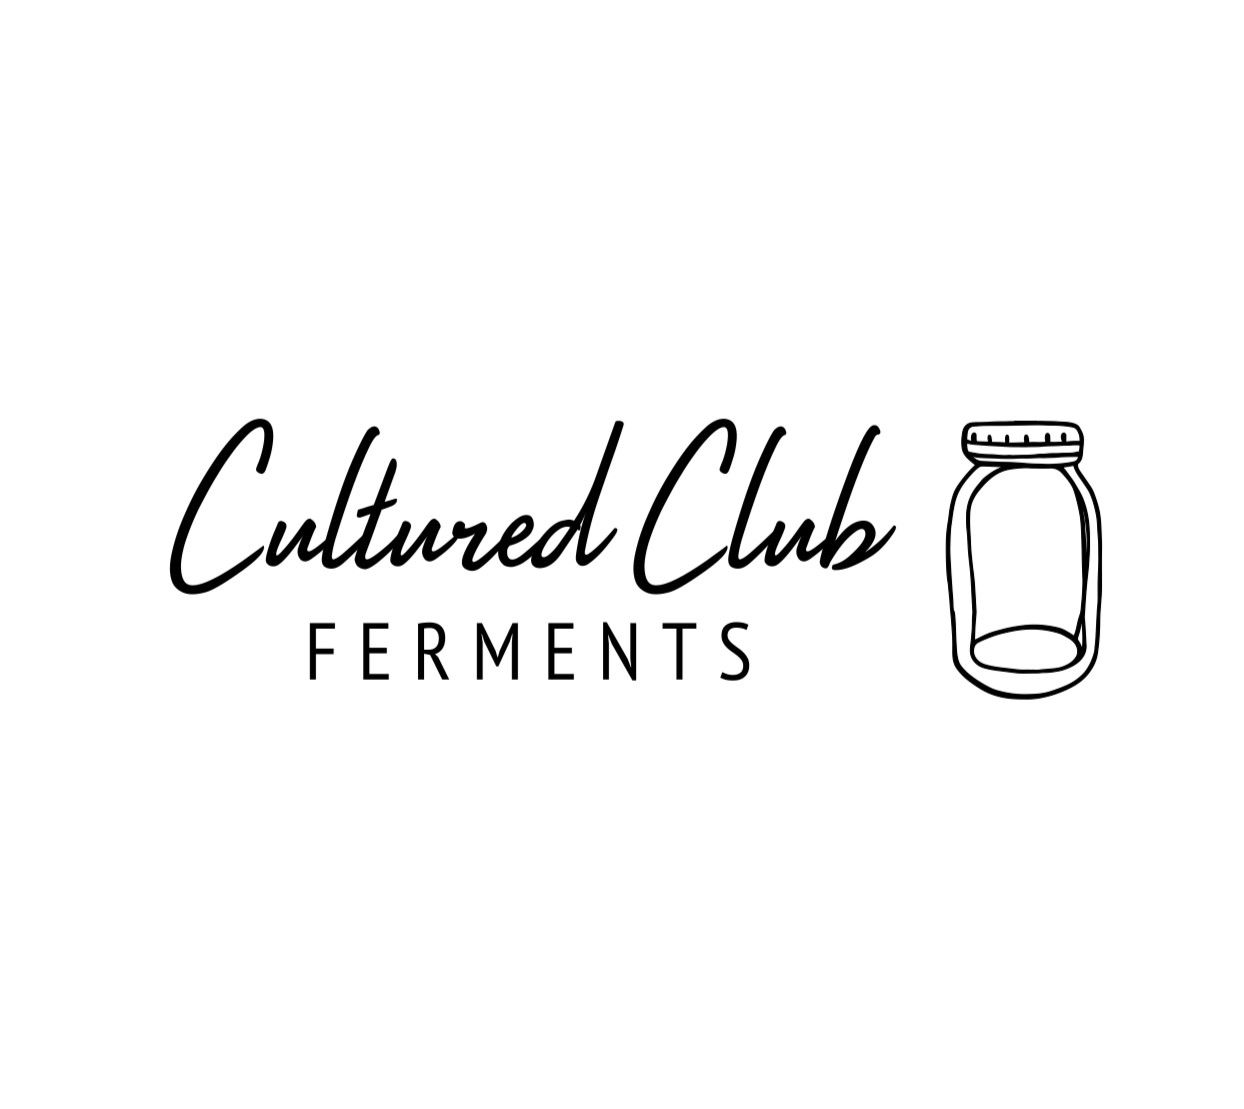 Love Your Guts! - Cultured Club Ferments